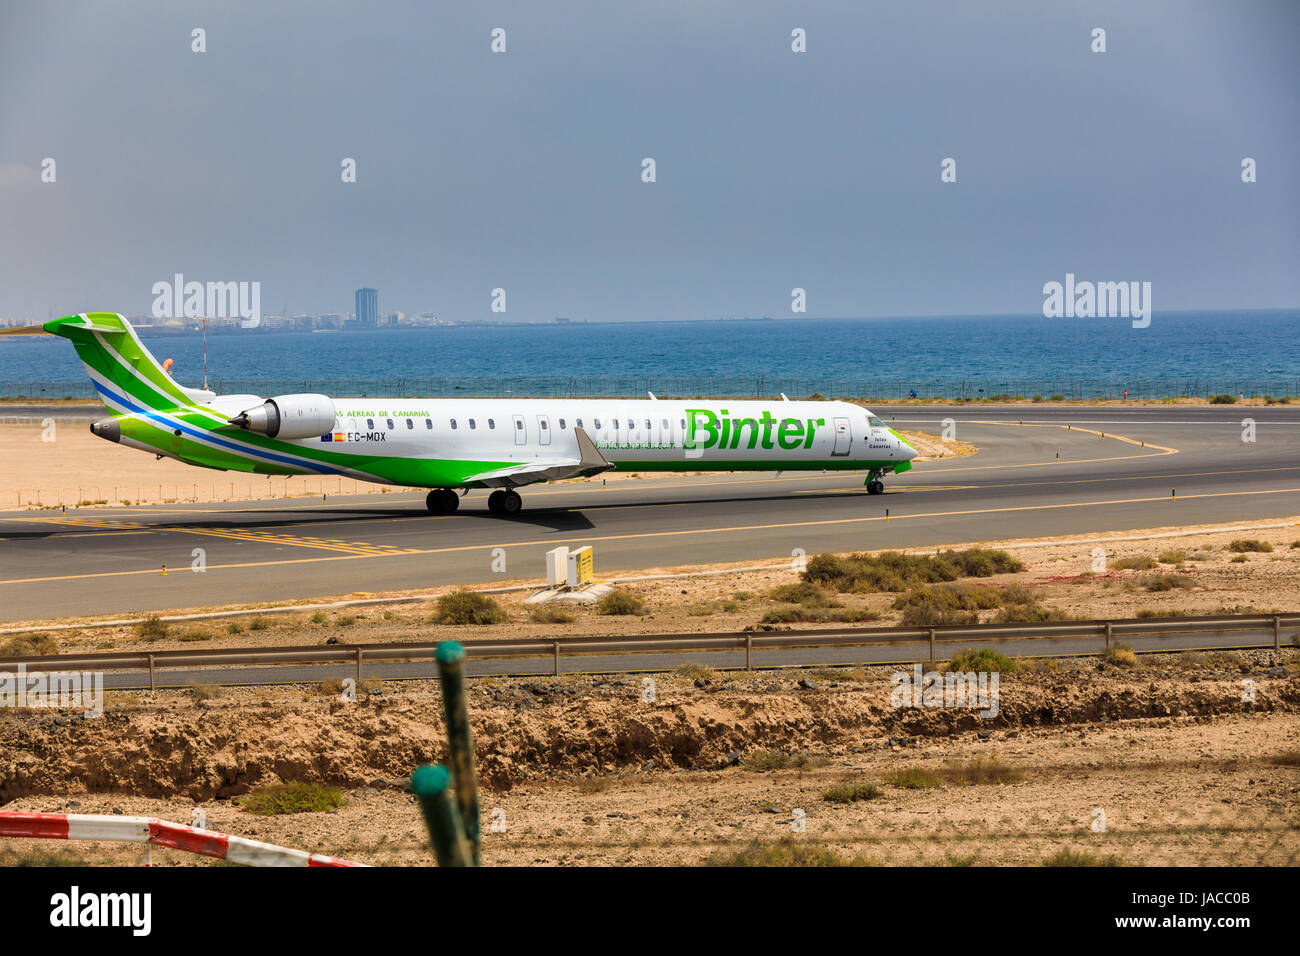 ARECIFE, SPAIN - APRIL, 16 2017: Canadair CRJ-1000 of Binter with the registration EC-MOX ready to take off at Lanzarote Airport Stock Photo